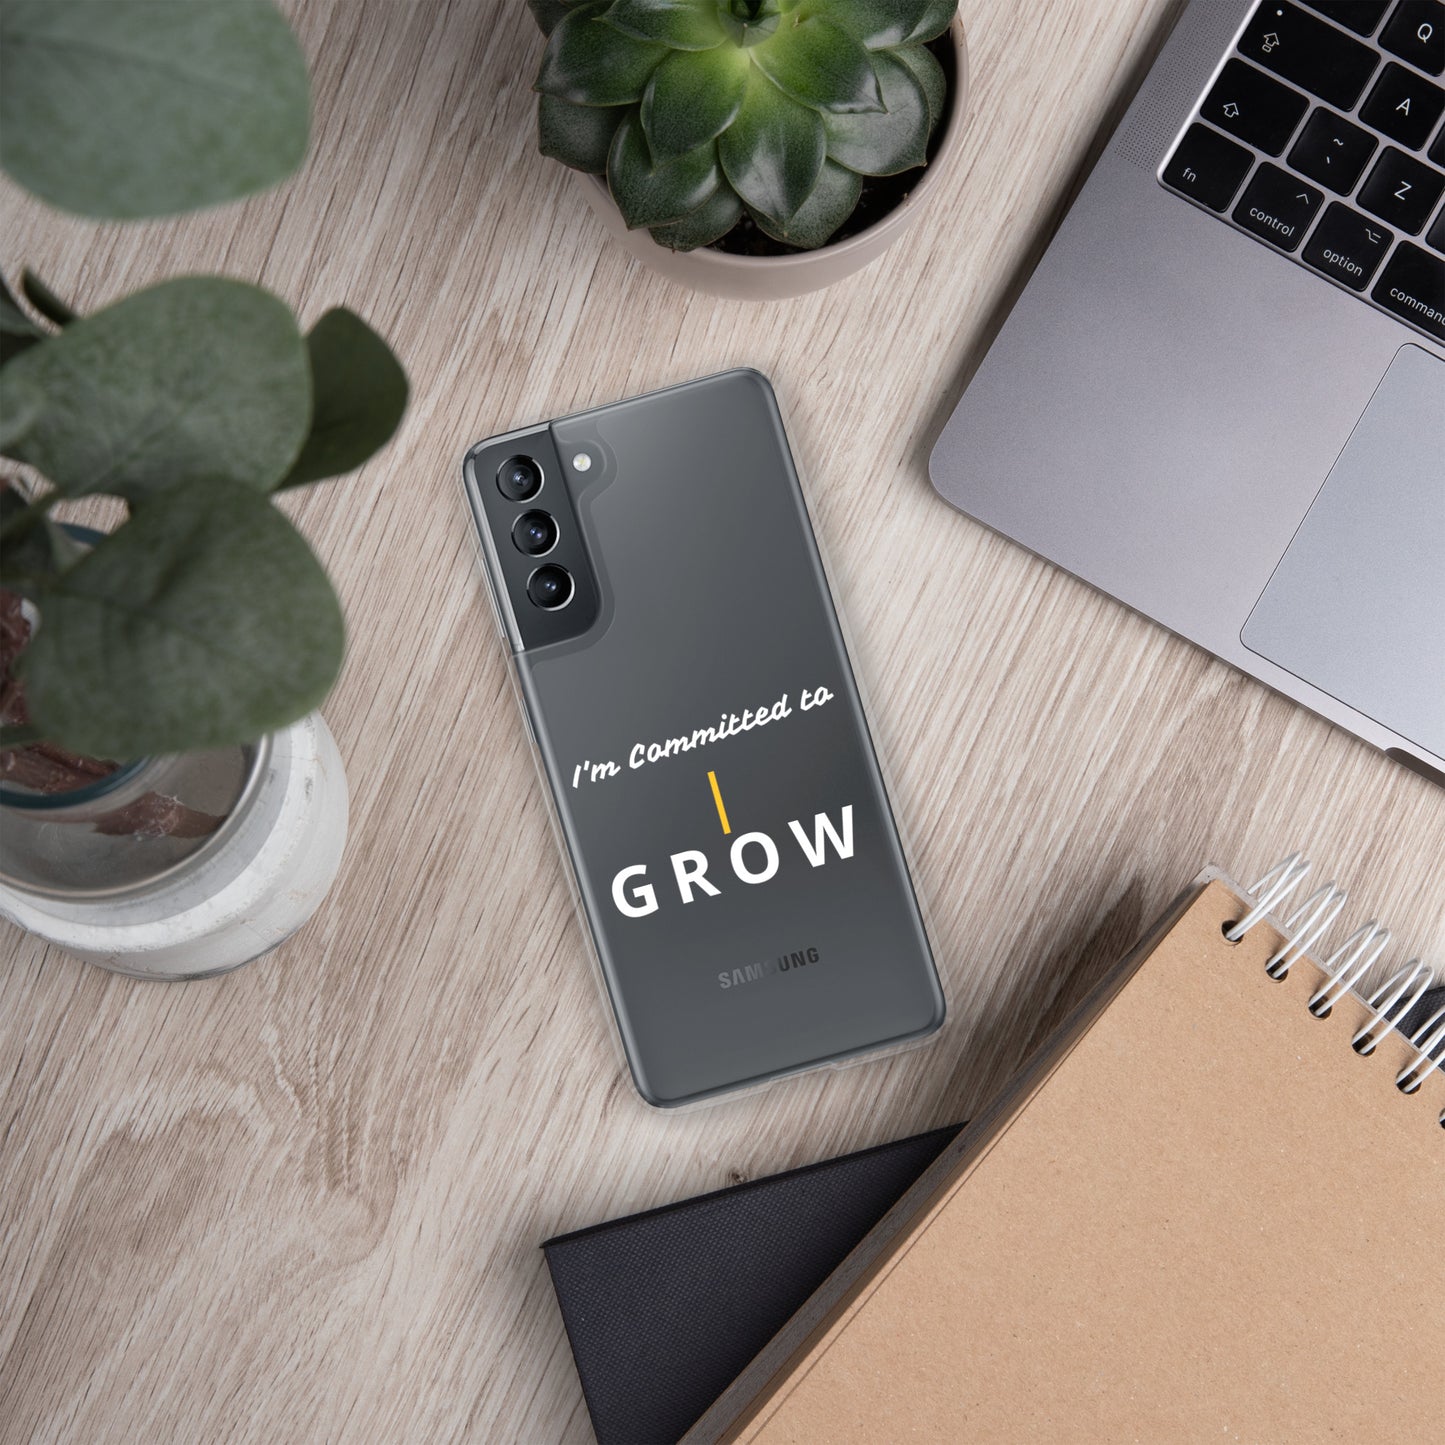 COMMITTED TO GROW Samsung Case